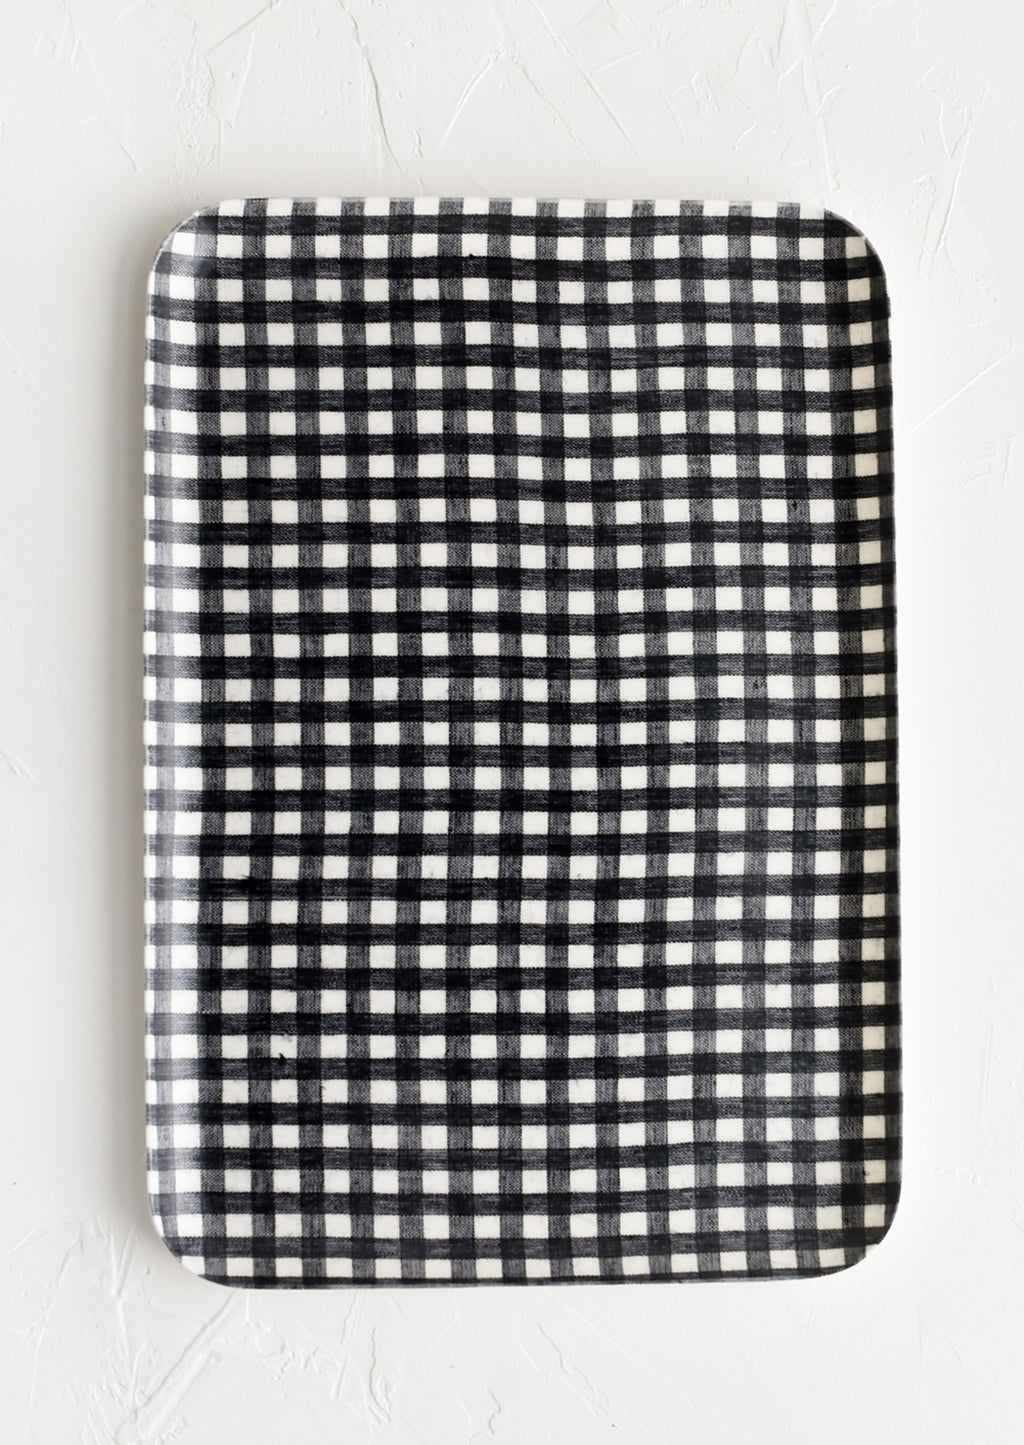 Large / Black Gingham: A large tray in black and white gingham print.